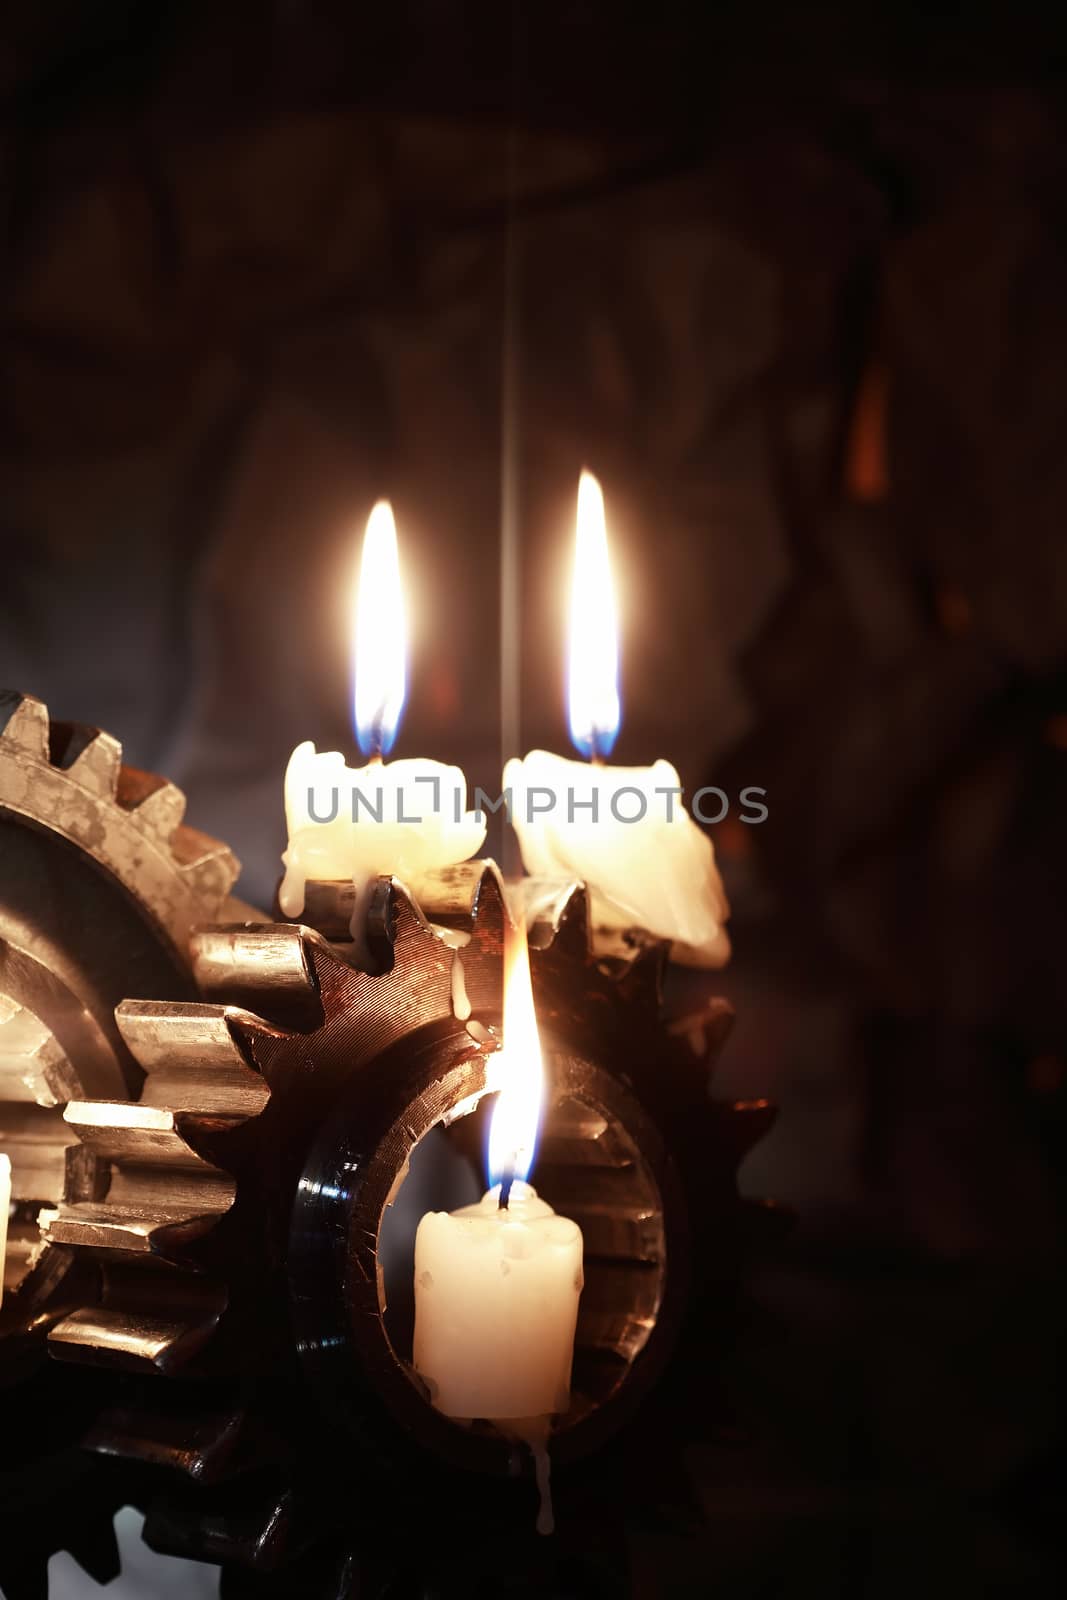 Candles On Gears by kvkirillov